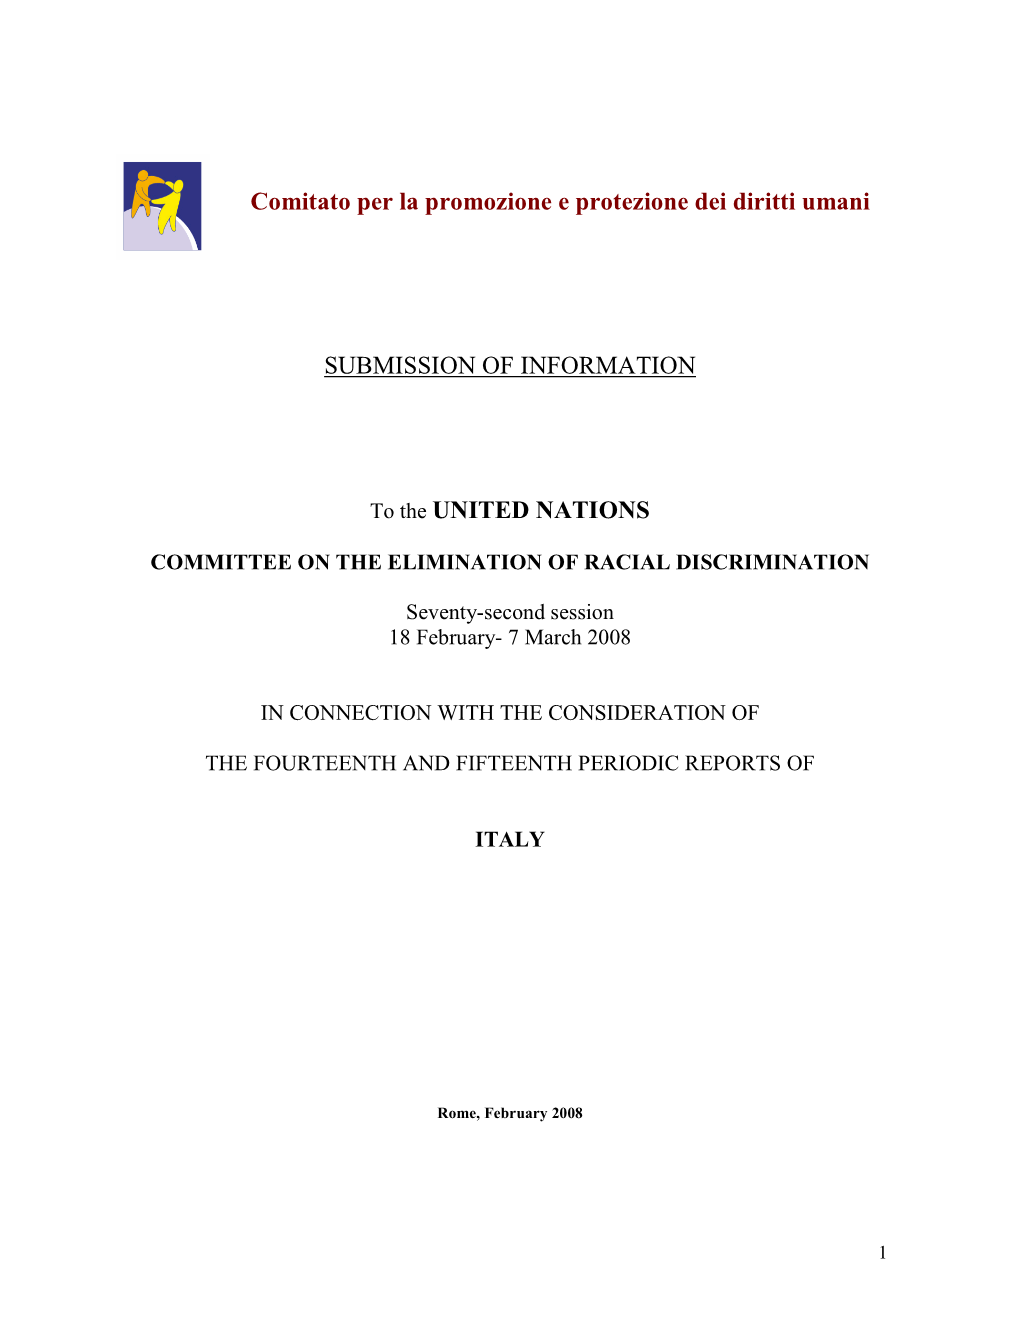 SUBM ISSION of INFORM ATION to the UNITED NATIONS Comitato Per